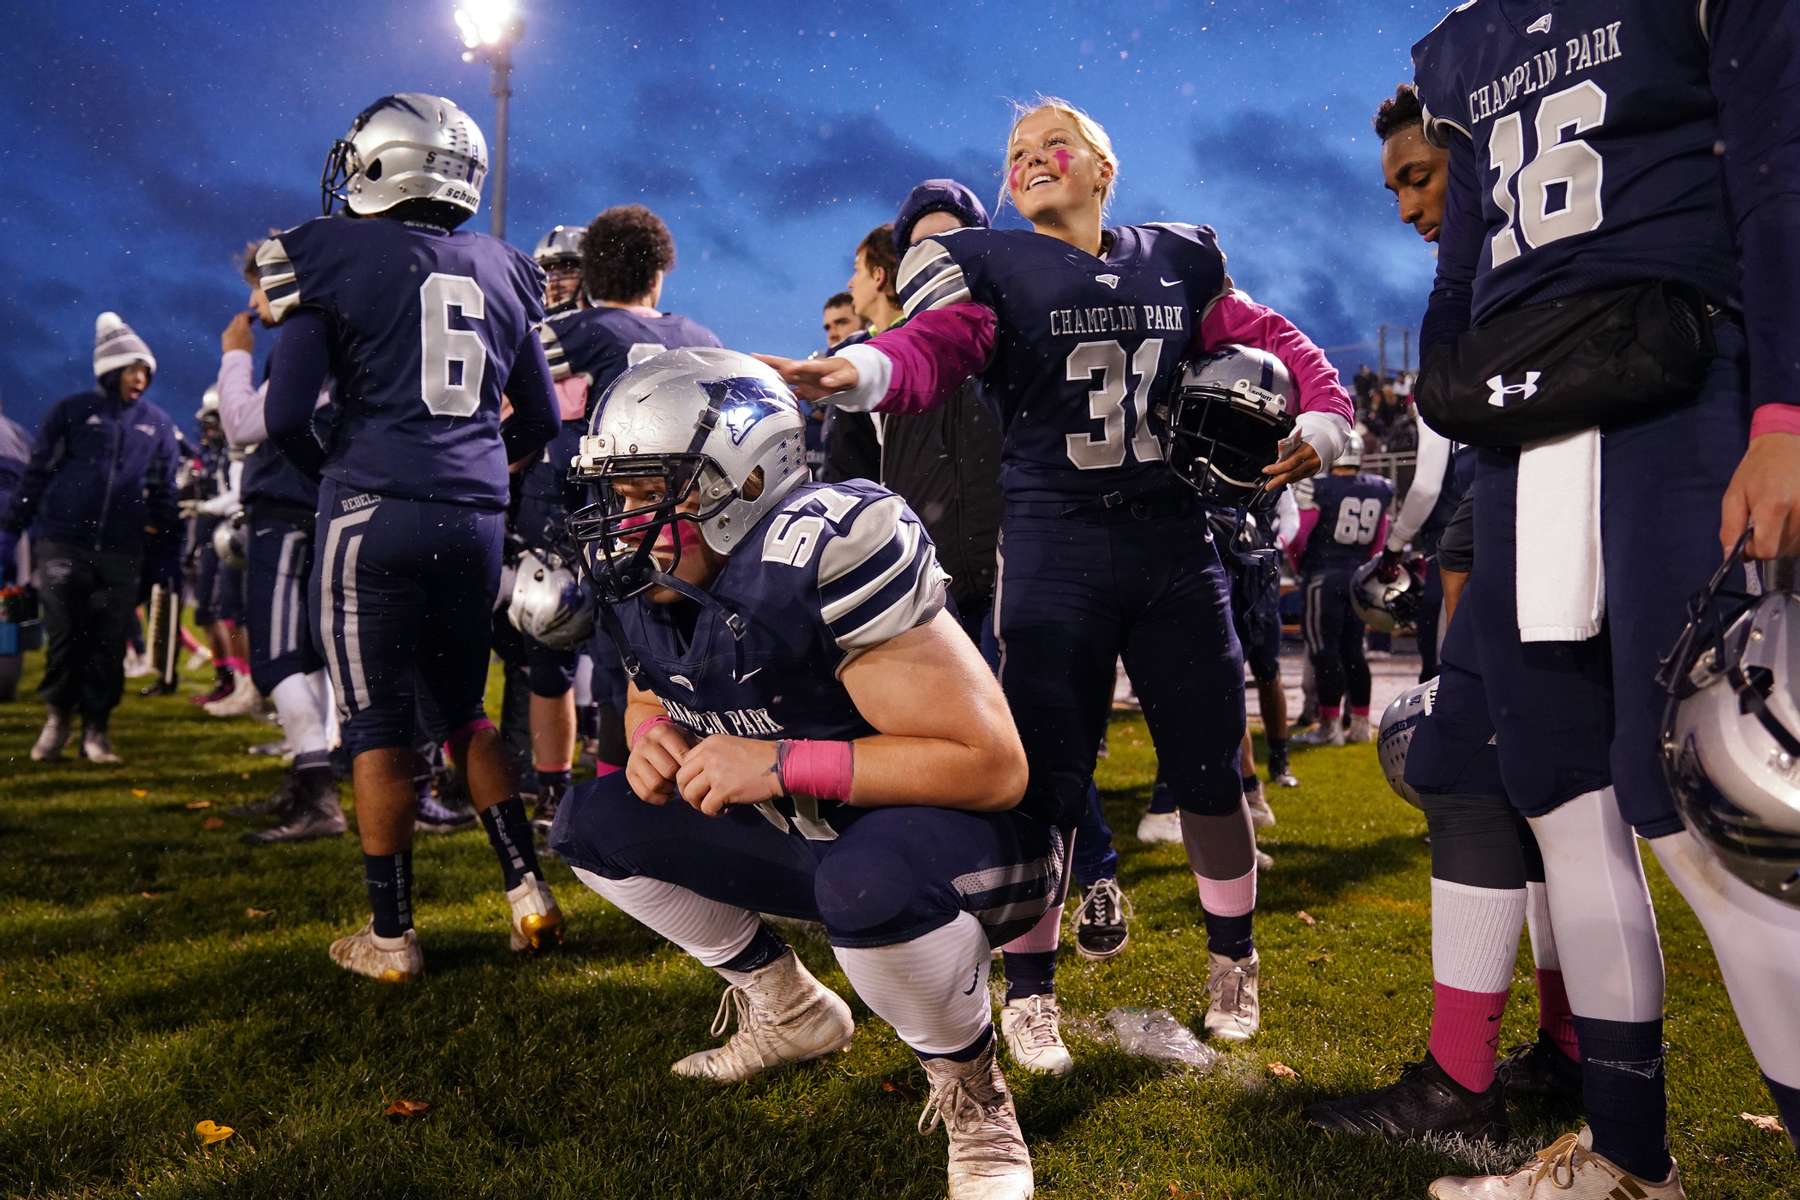 Champlin Park defensive back Holly Johnson gave her teammate defensive lineman Gavin Rosstedt a pat on the helmet as he waited on the sidelines ahead of a game against Totino-Grace in Champlin, Minn. 